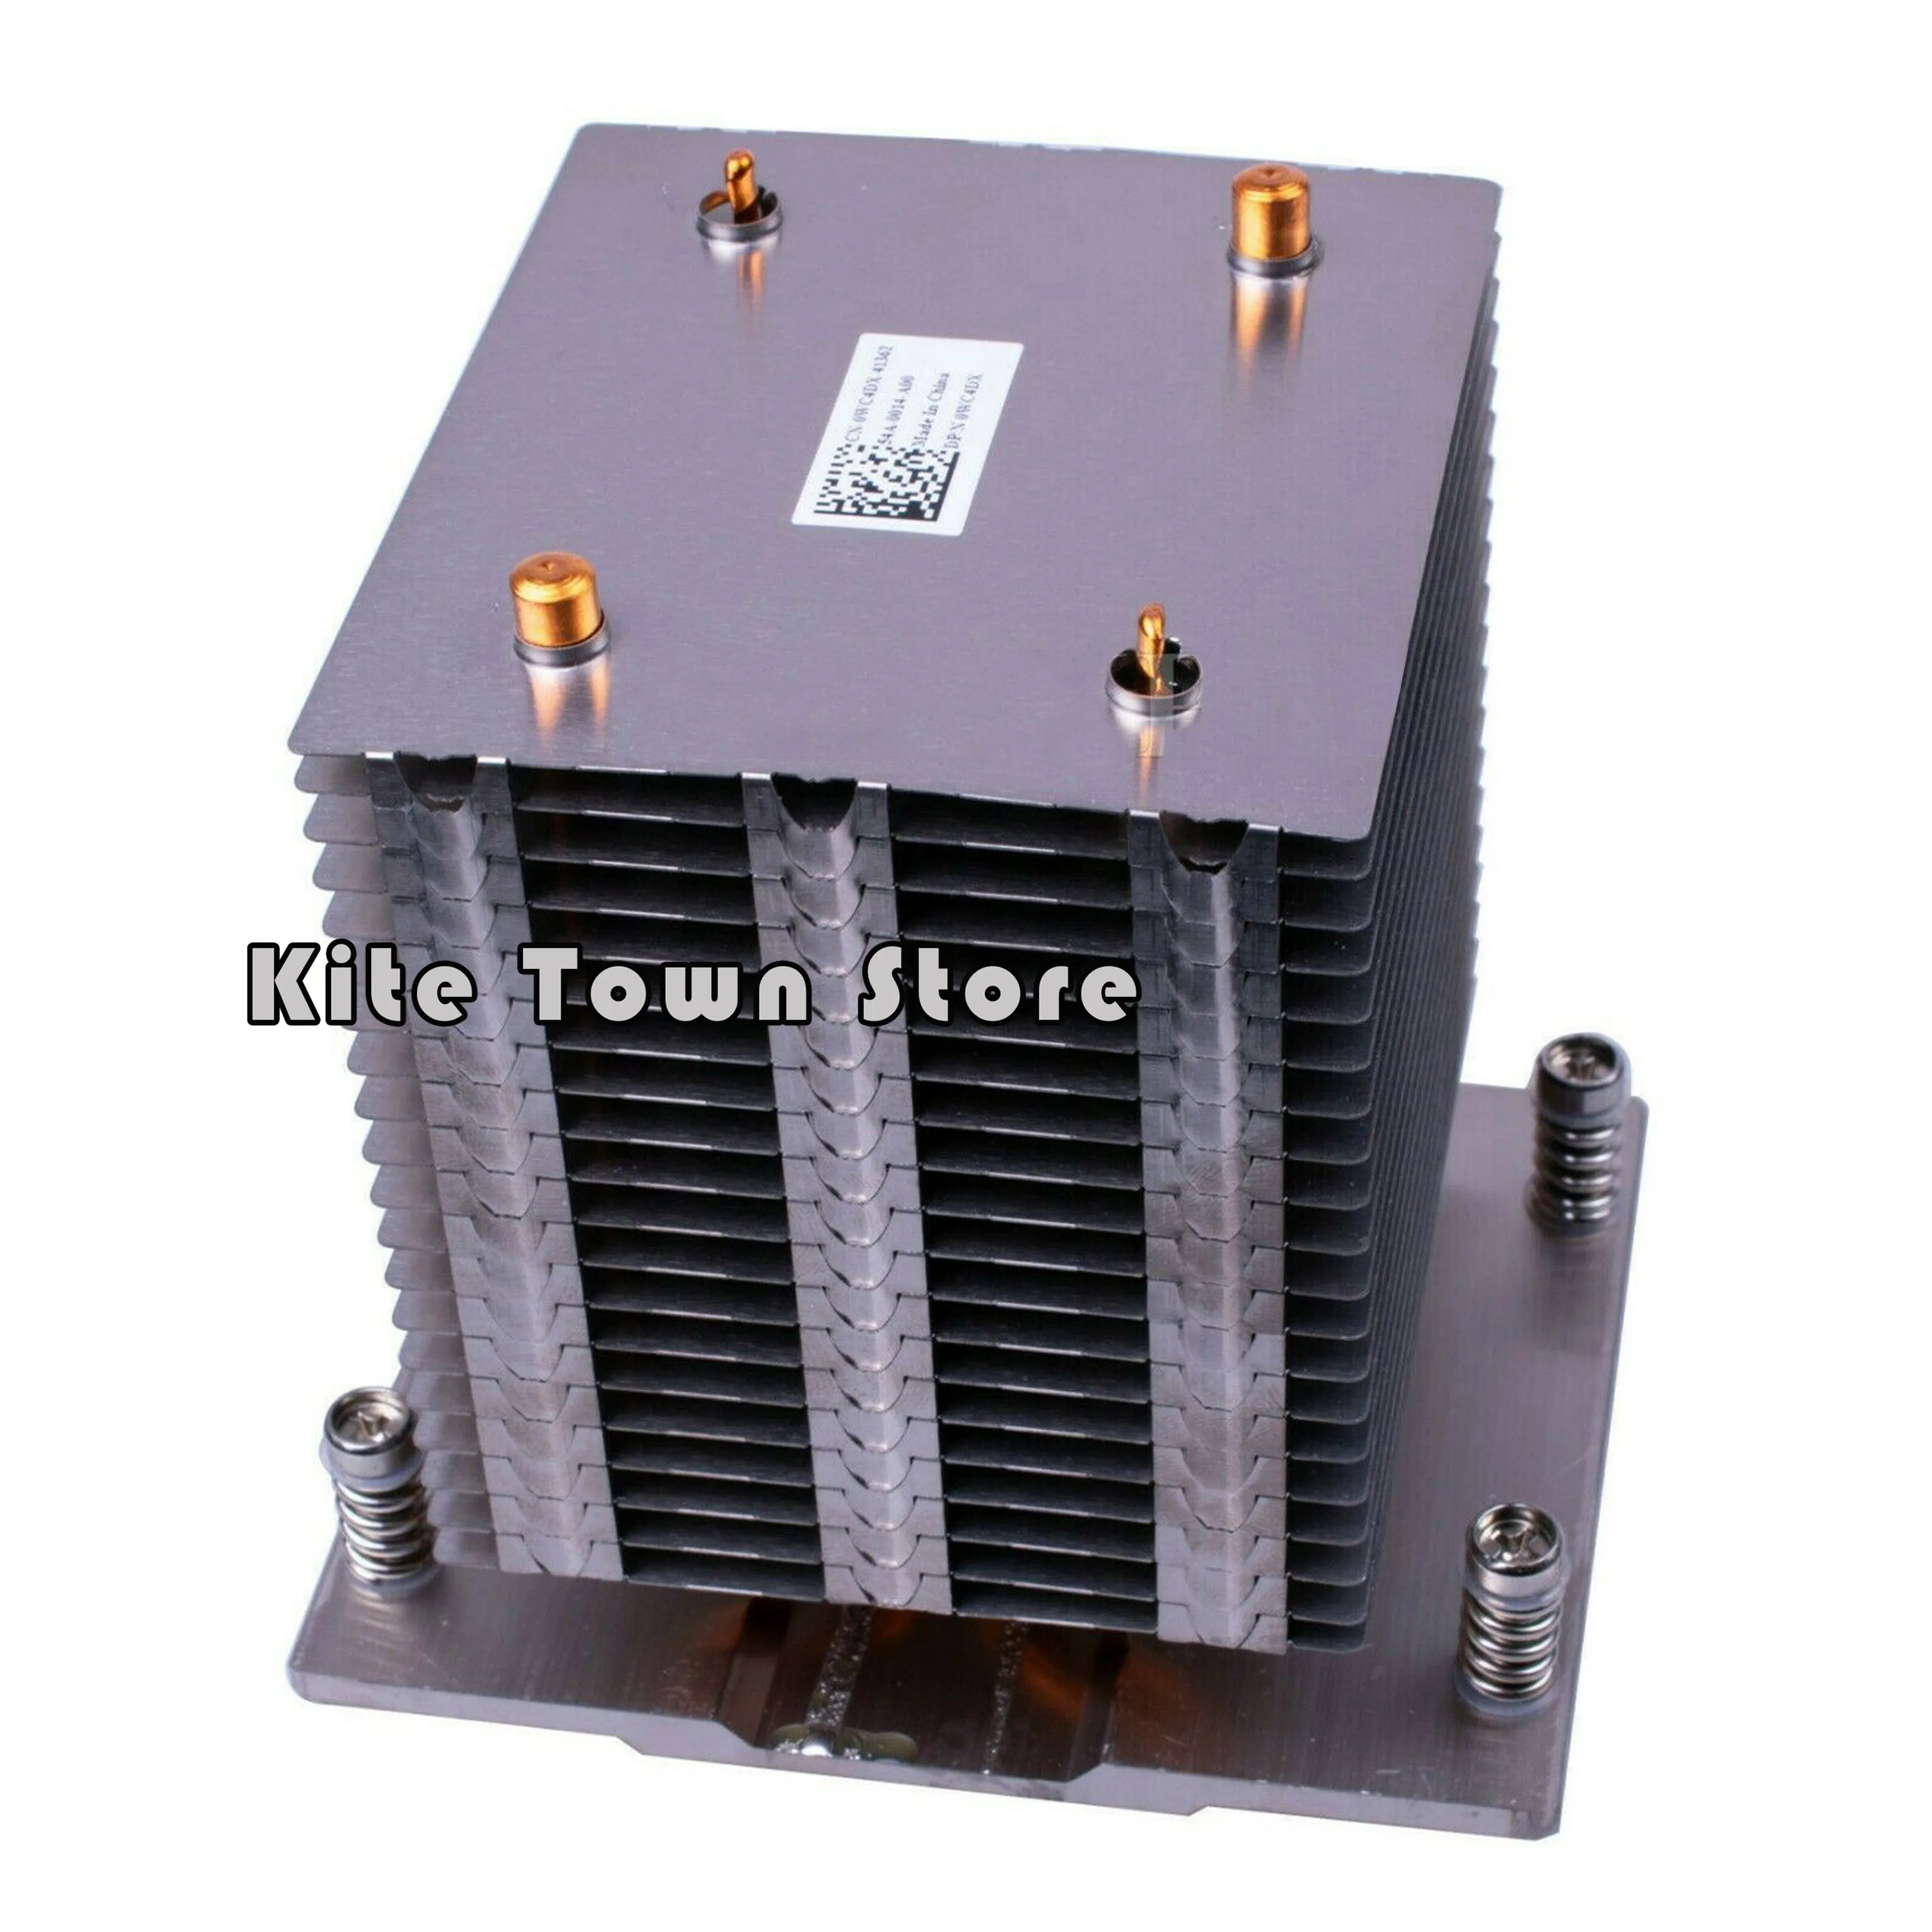 

New CPU Cooling Heatsink for Dell PowerEdge T430 Tower Server WC4DX